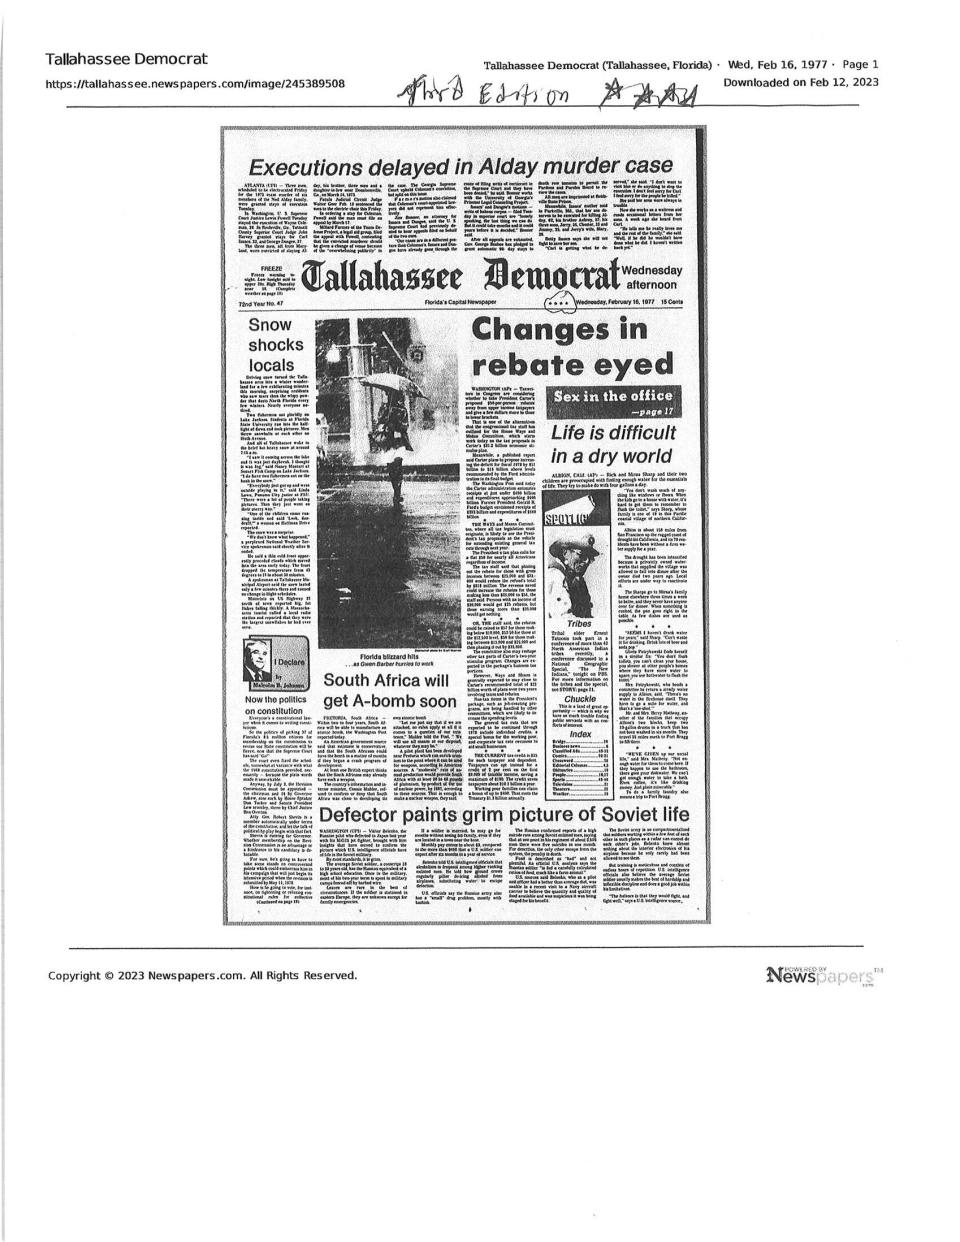 The third edition of the Tallahassee Democrat with an article on the snow from Feb. 16, 1977.